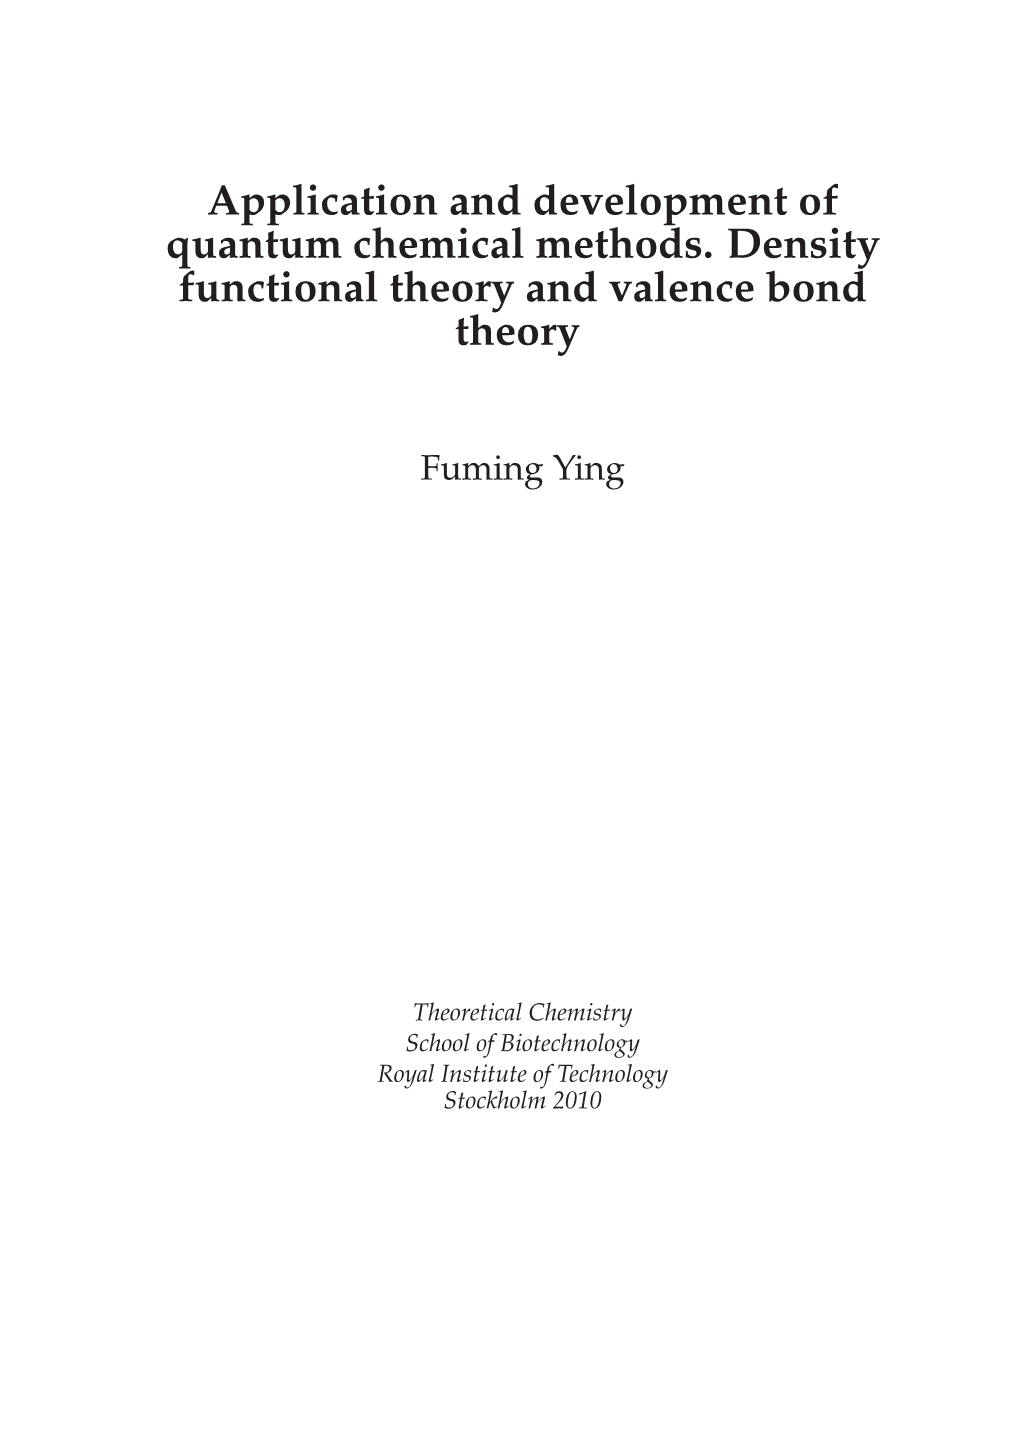 Application and Development of Quantum Chemical Methods. Density Functional Theory and Valence Bond Theory